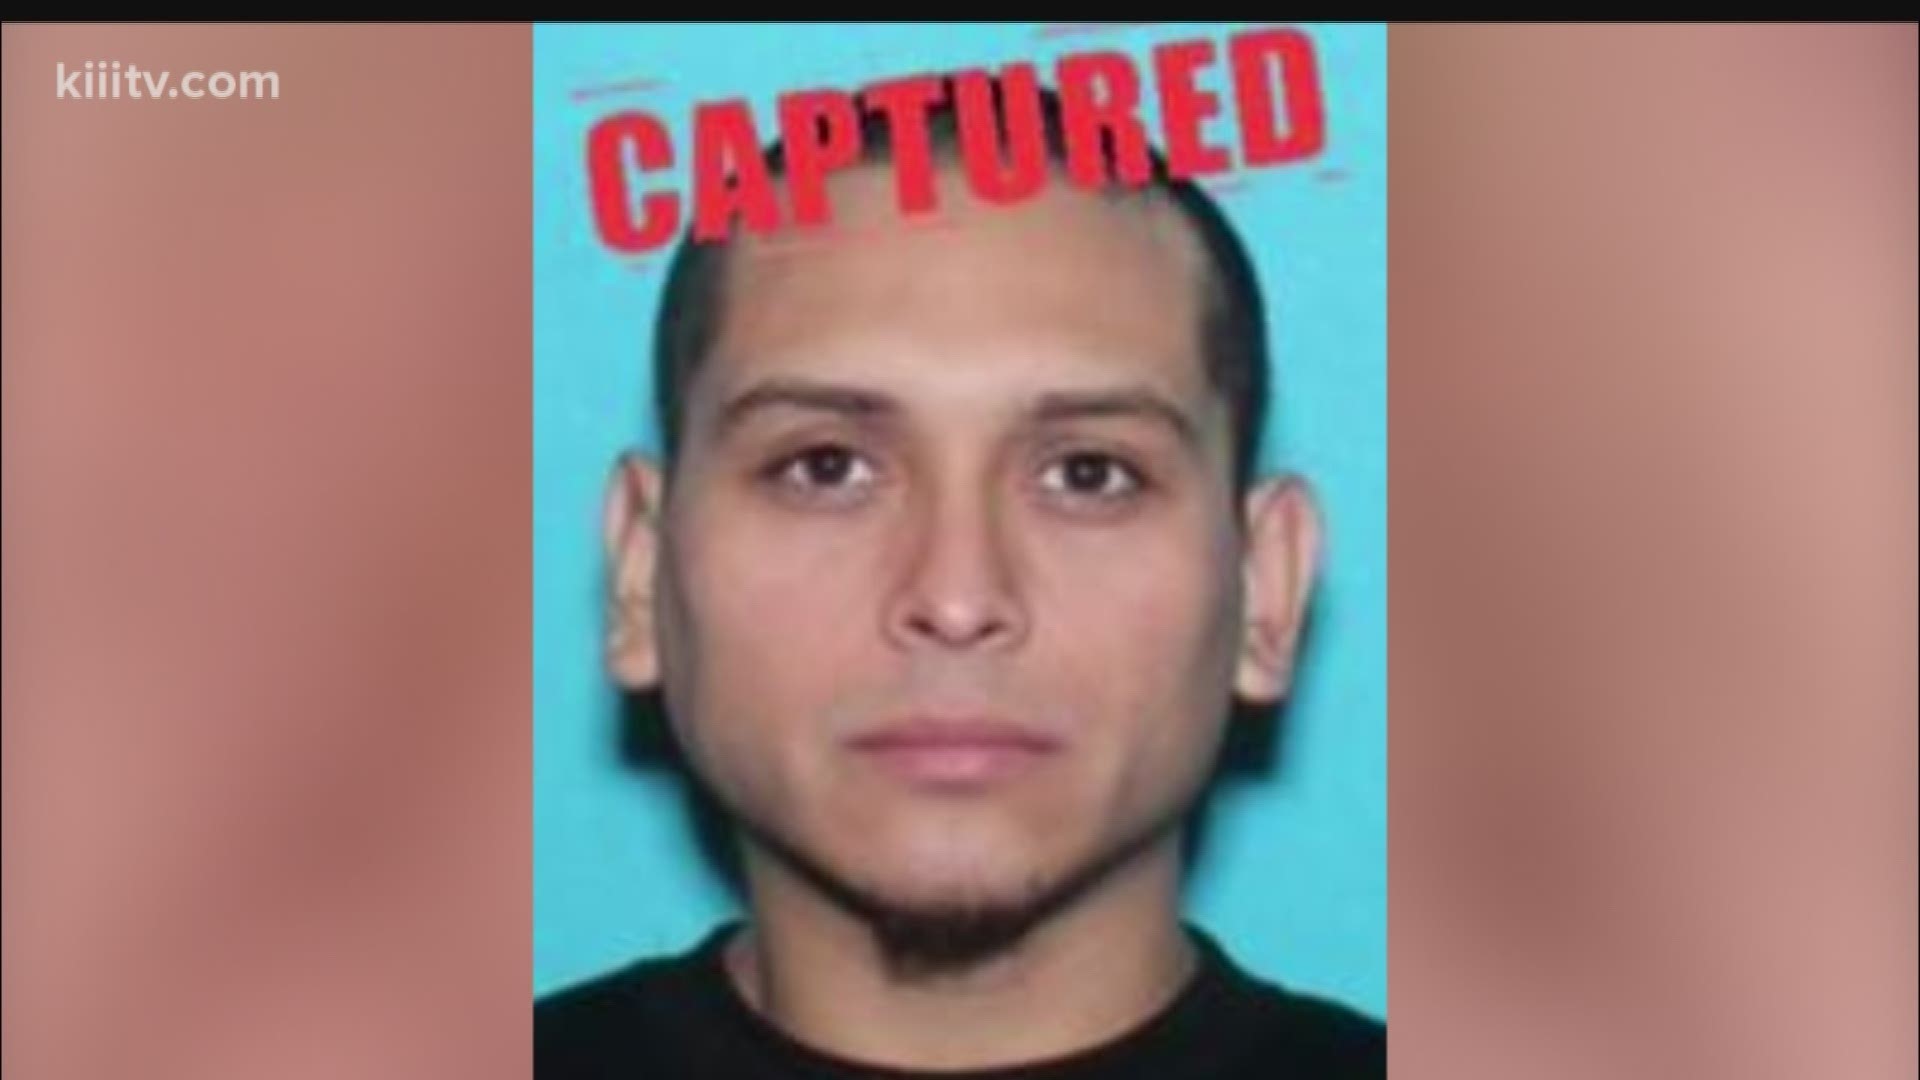 Ruiz was wanted for failure to register as a sex offender and has been on the Top 10 Most Wanted list since October of 2017.